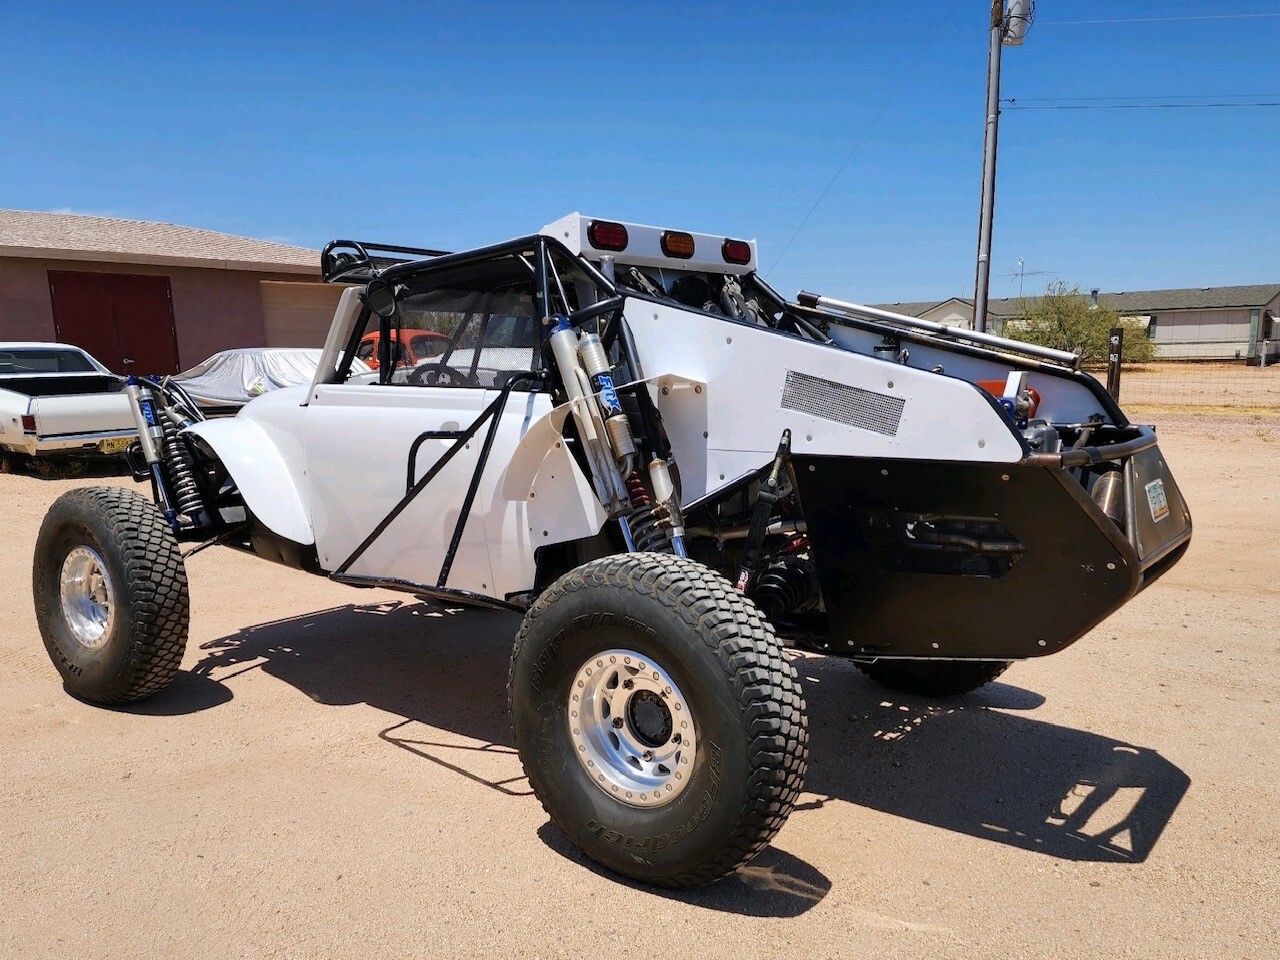 For Sale: Class 5 Unlimited Proven Race Car (Titled in AZ) For Sale - photo0